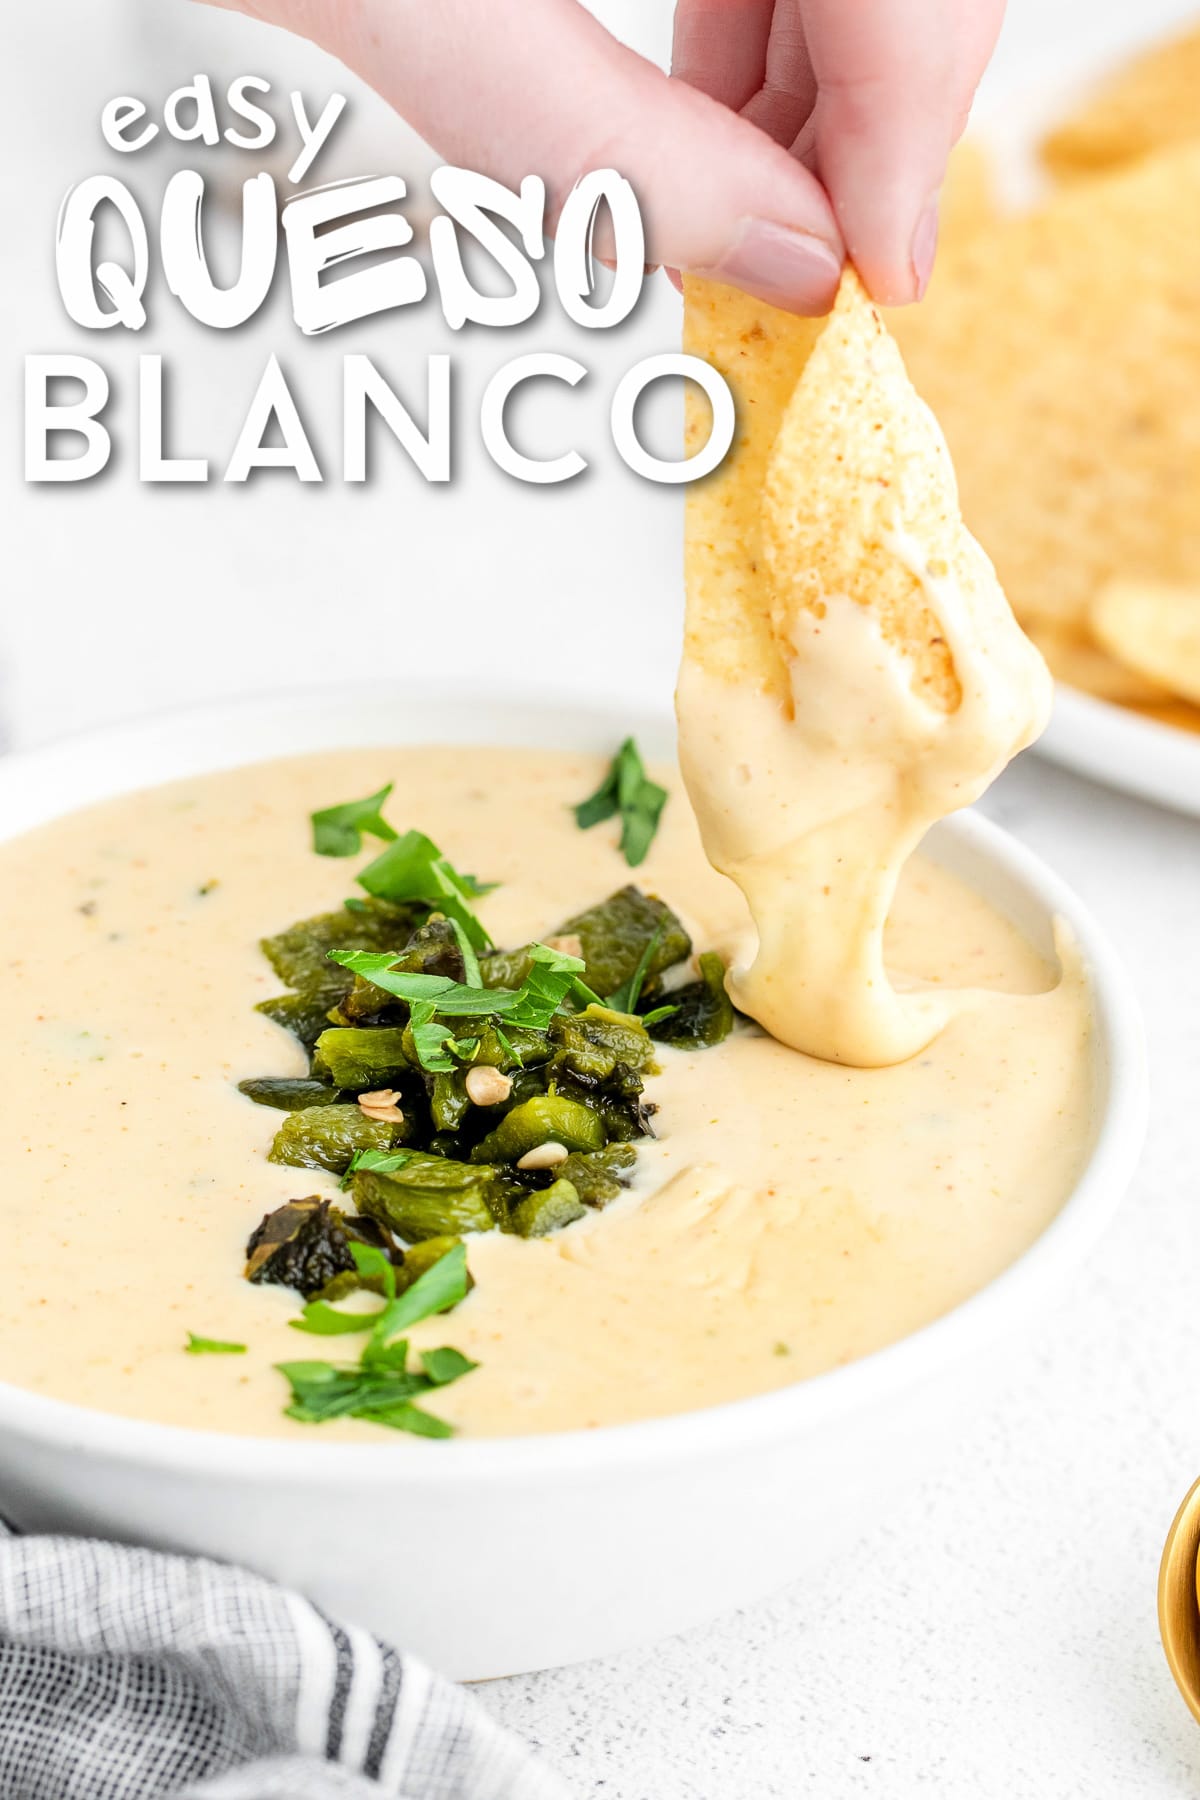 chip being dipped in queso blanco with charred poblanos on top. title overlay at top of image.